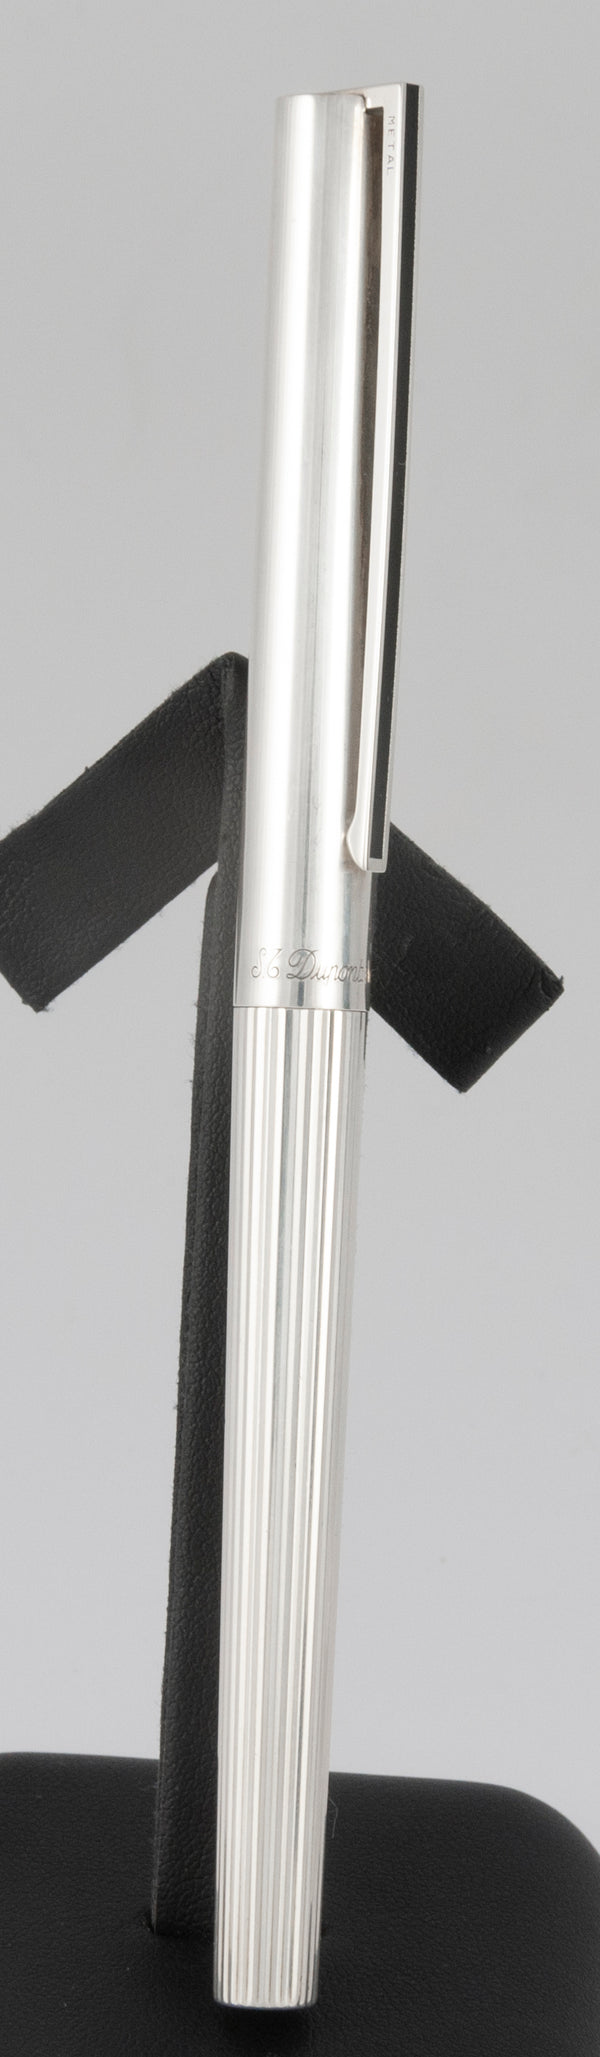 S.T. Dupont Rollerball Pen Silver 925